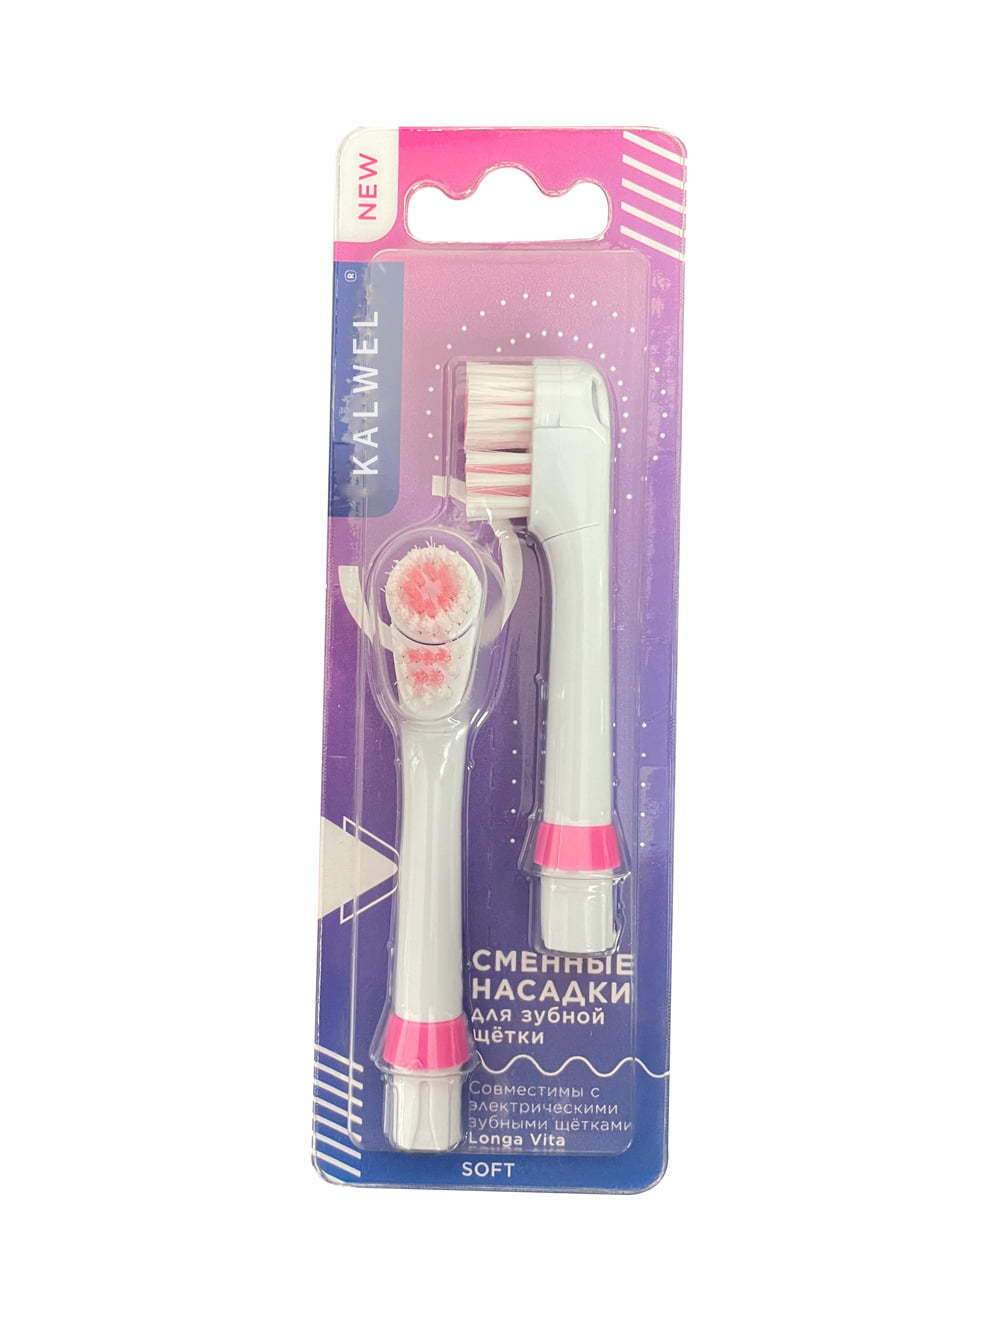 KHET007-S Replacement Toothbrush Double Head Precision Clean Soft Dupont Bristle For Kids